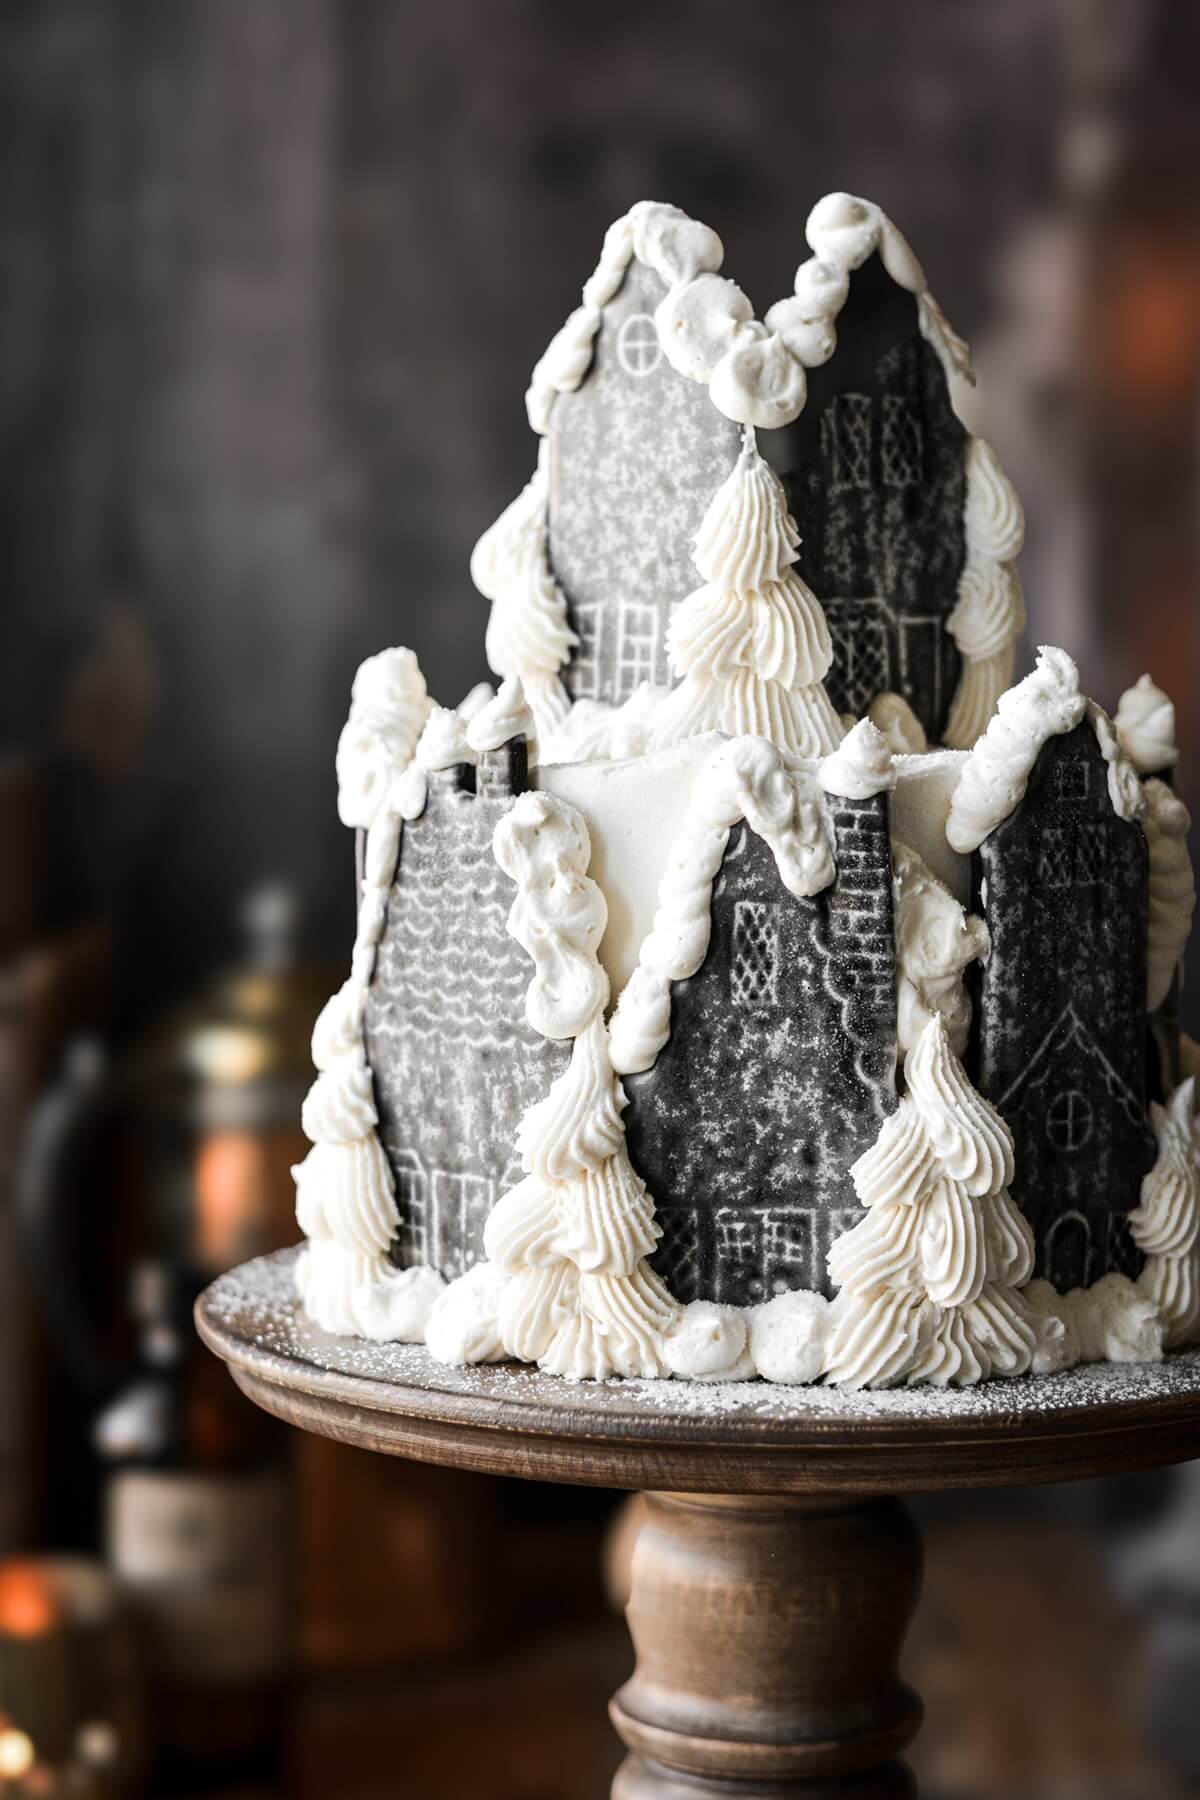 Hogsmeade village cake with chocolate cookie houses and piped buttercream trees and snowdrifts.